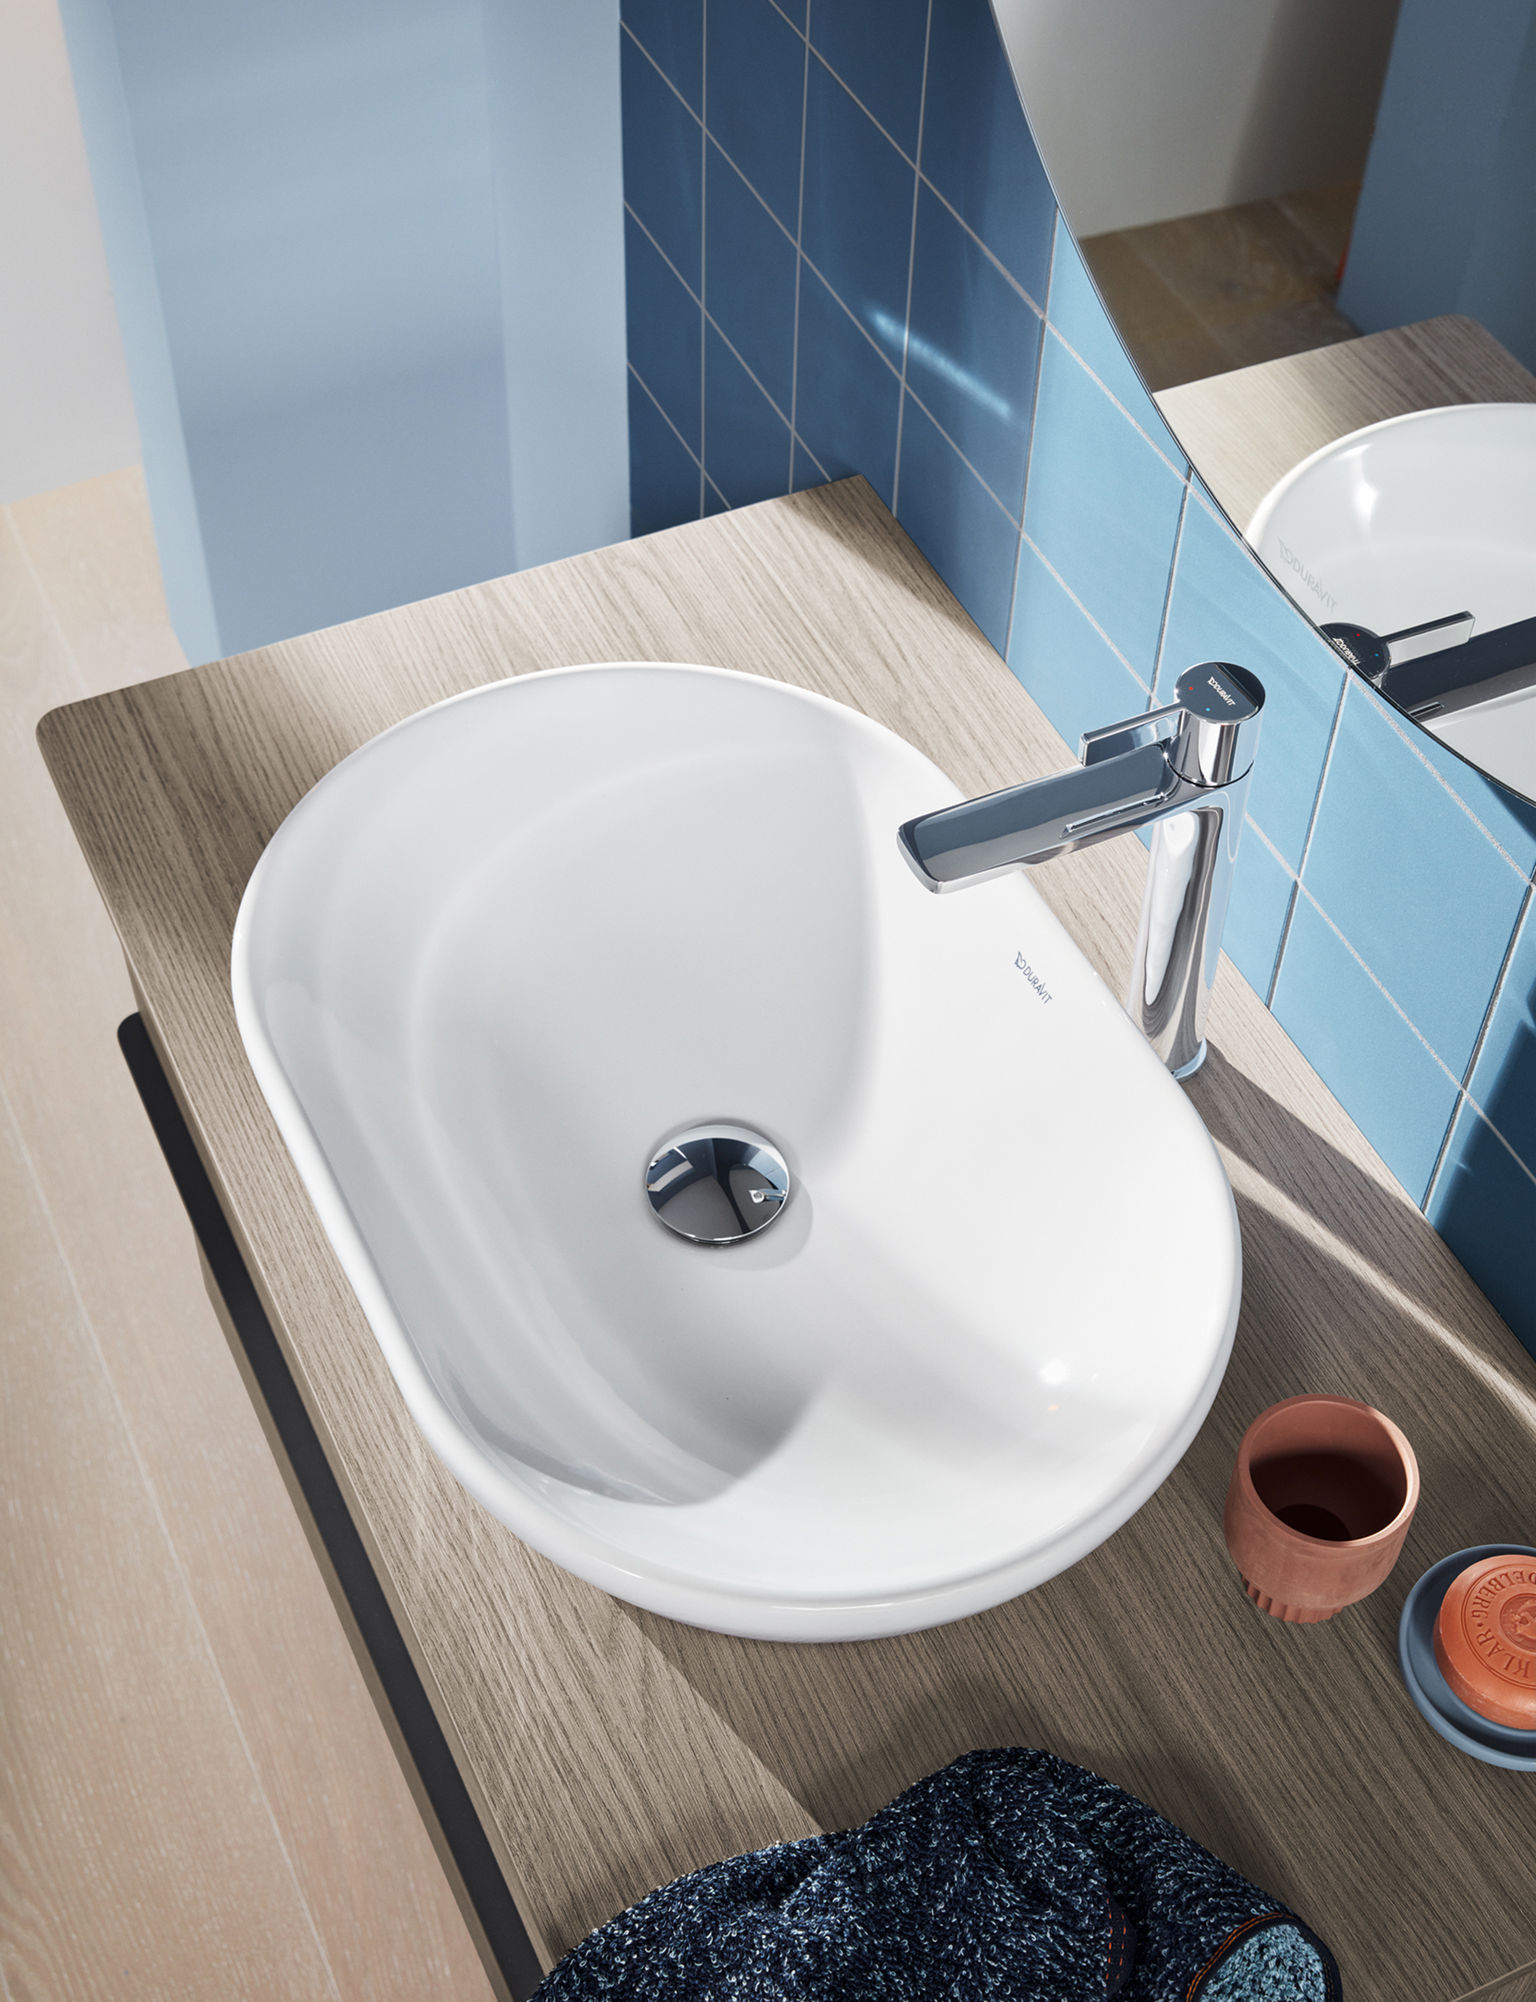 D-Neo faucets